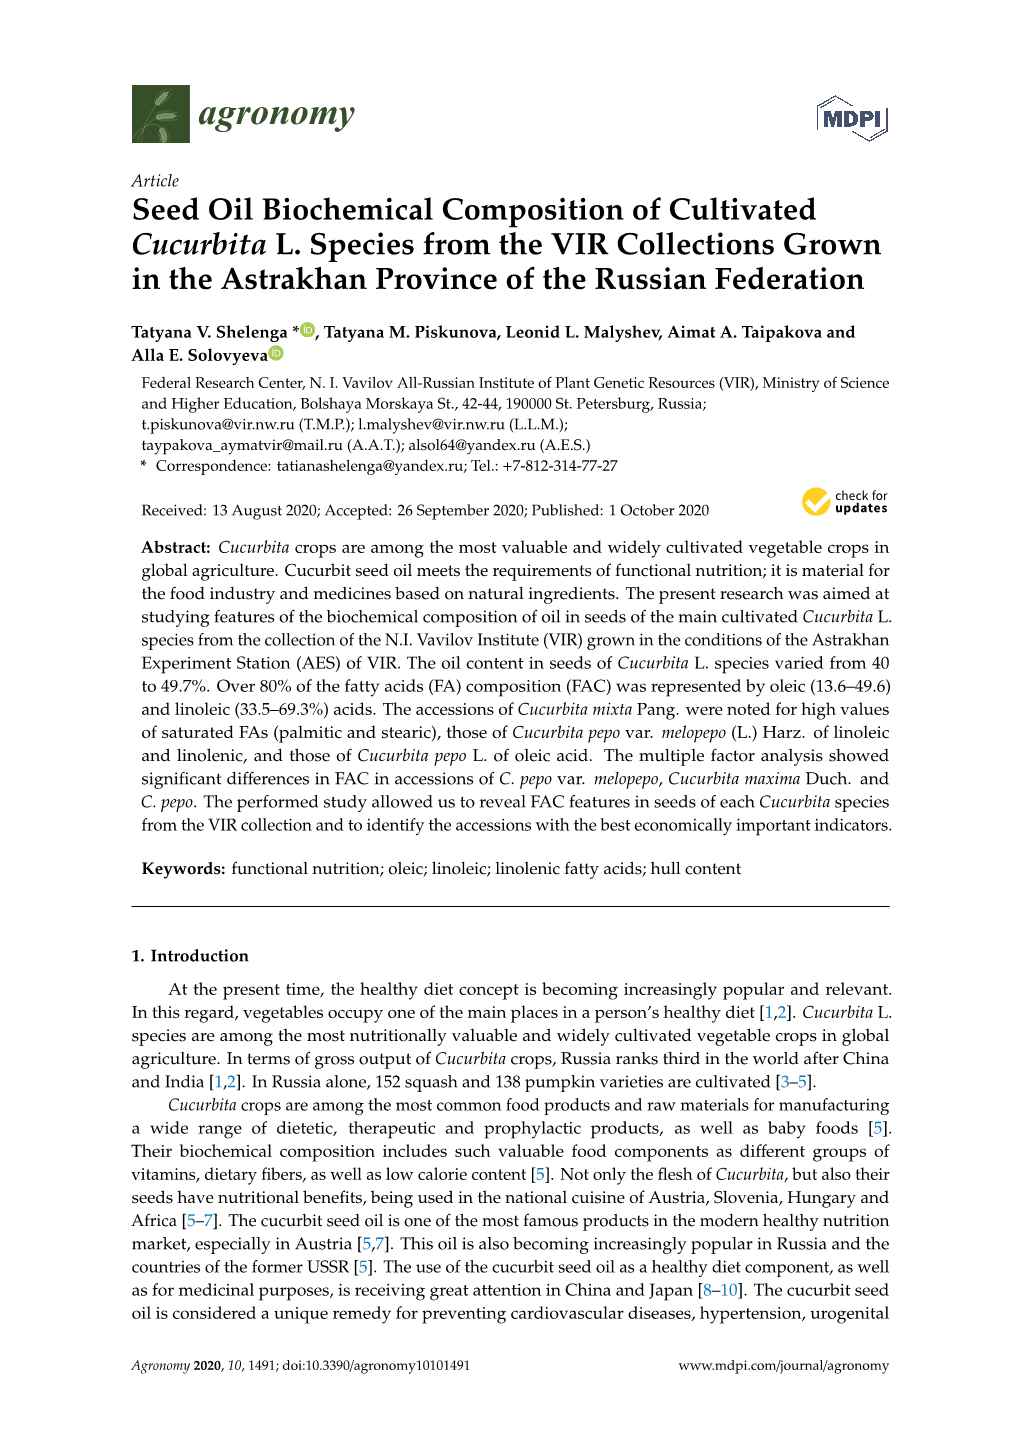 Seed Oil Biochemical Composition of Cultivated Cucurbita L. Species from the VIR Collections Grown in the Astrakhan Province of the Russian Federation